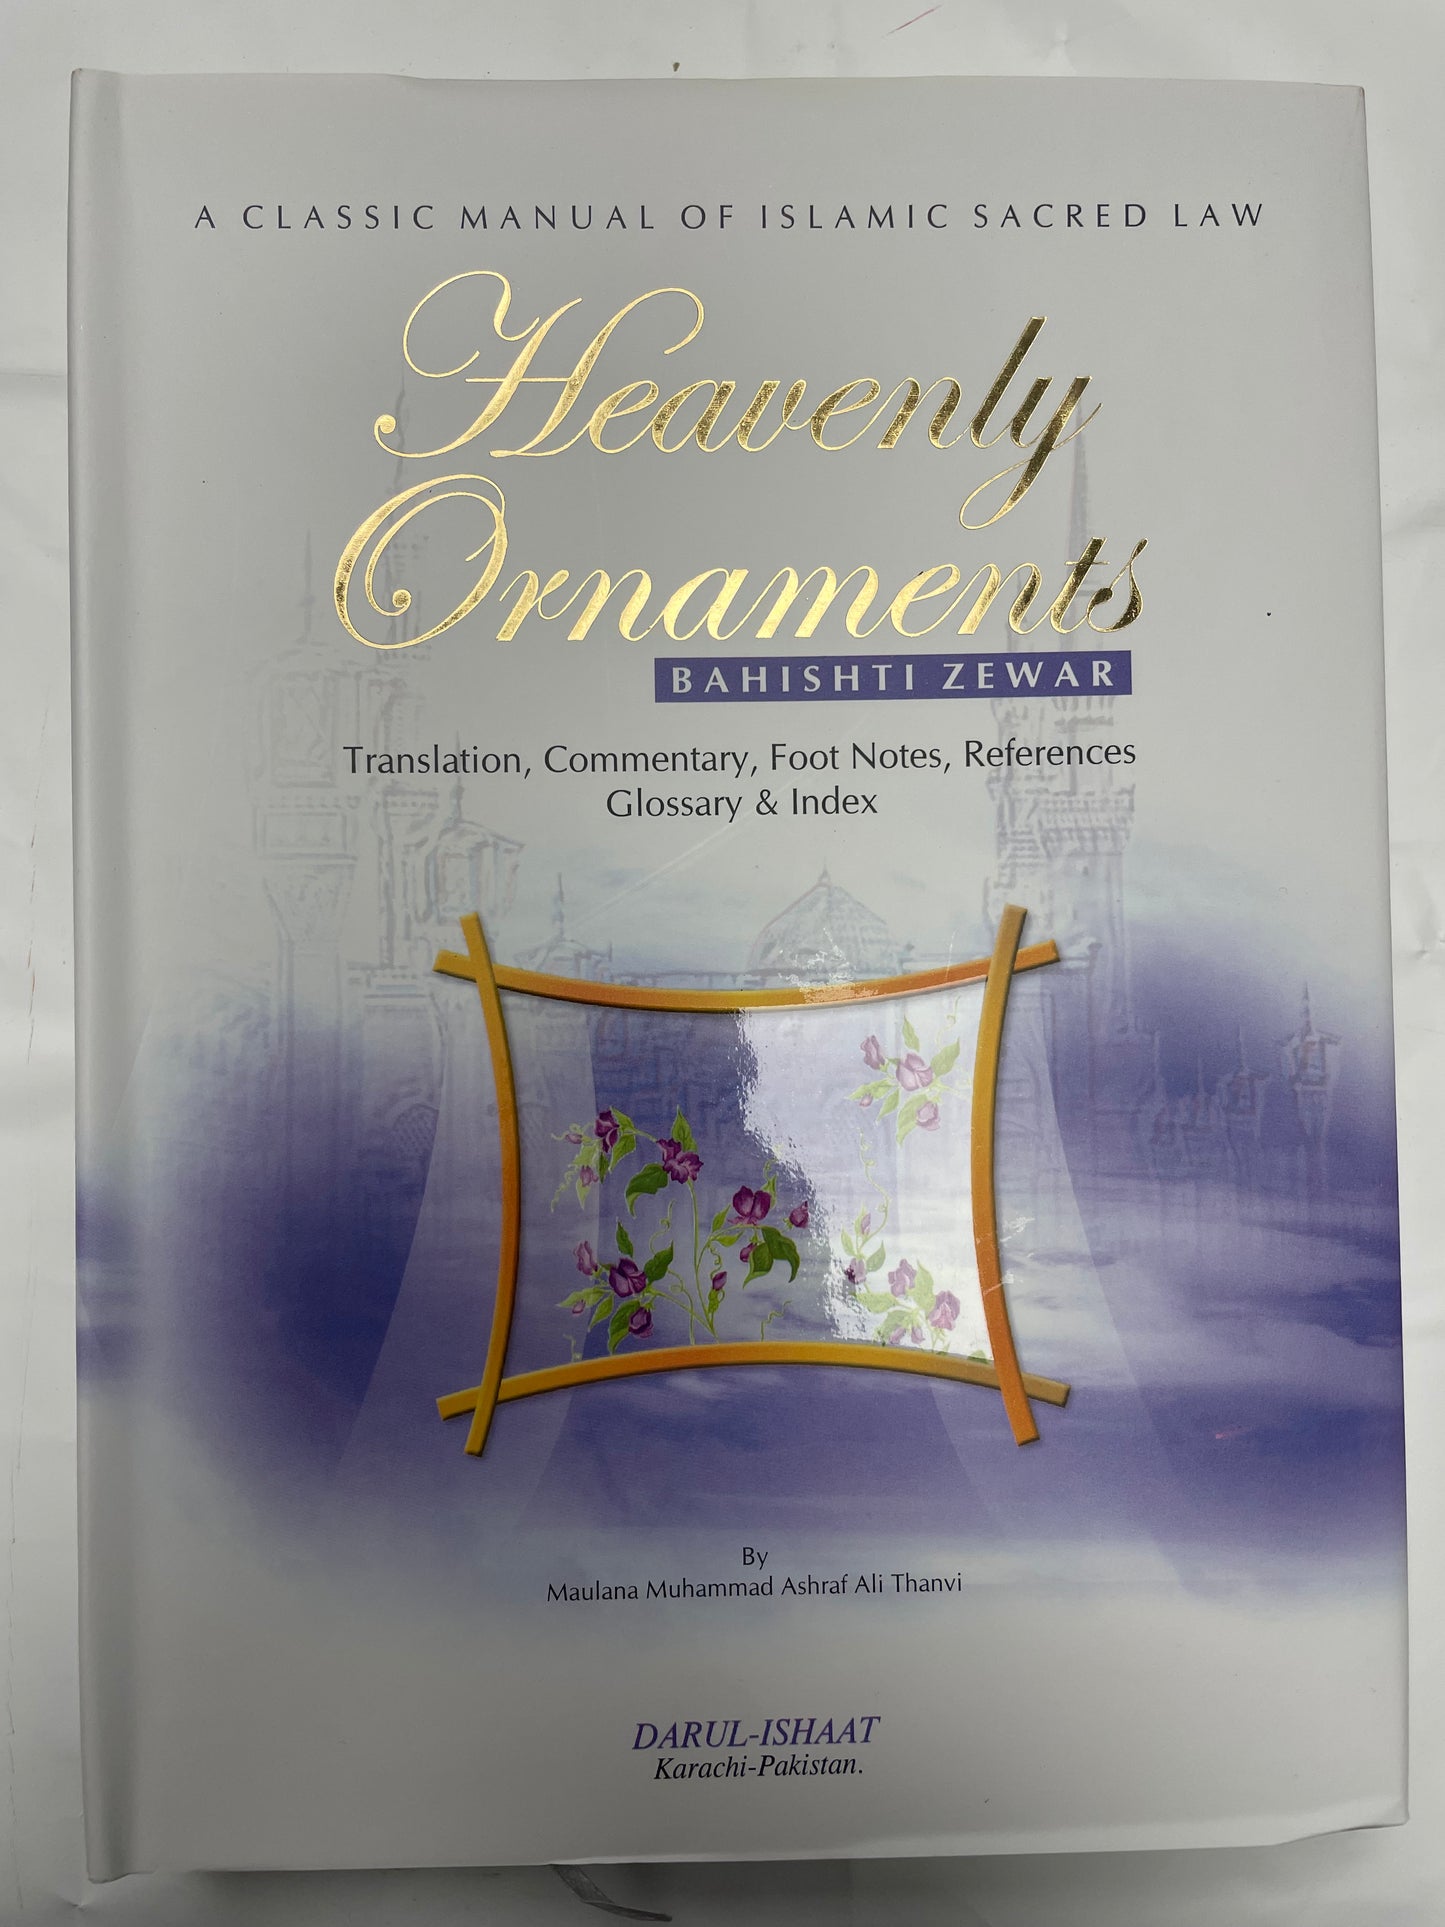 A Classic Manual of Islamic Law - Heavenly Ornaments - بہشتی زيور